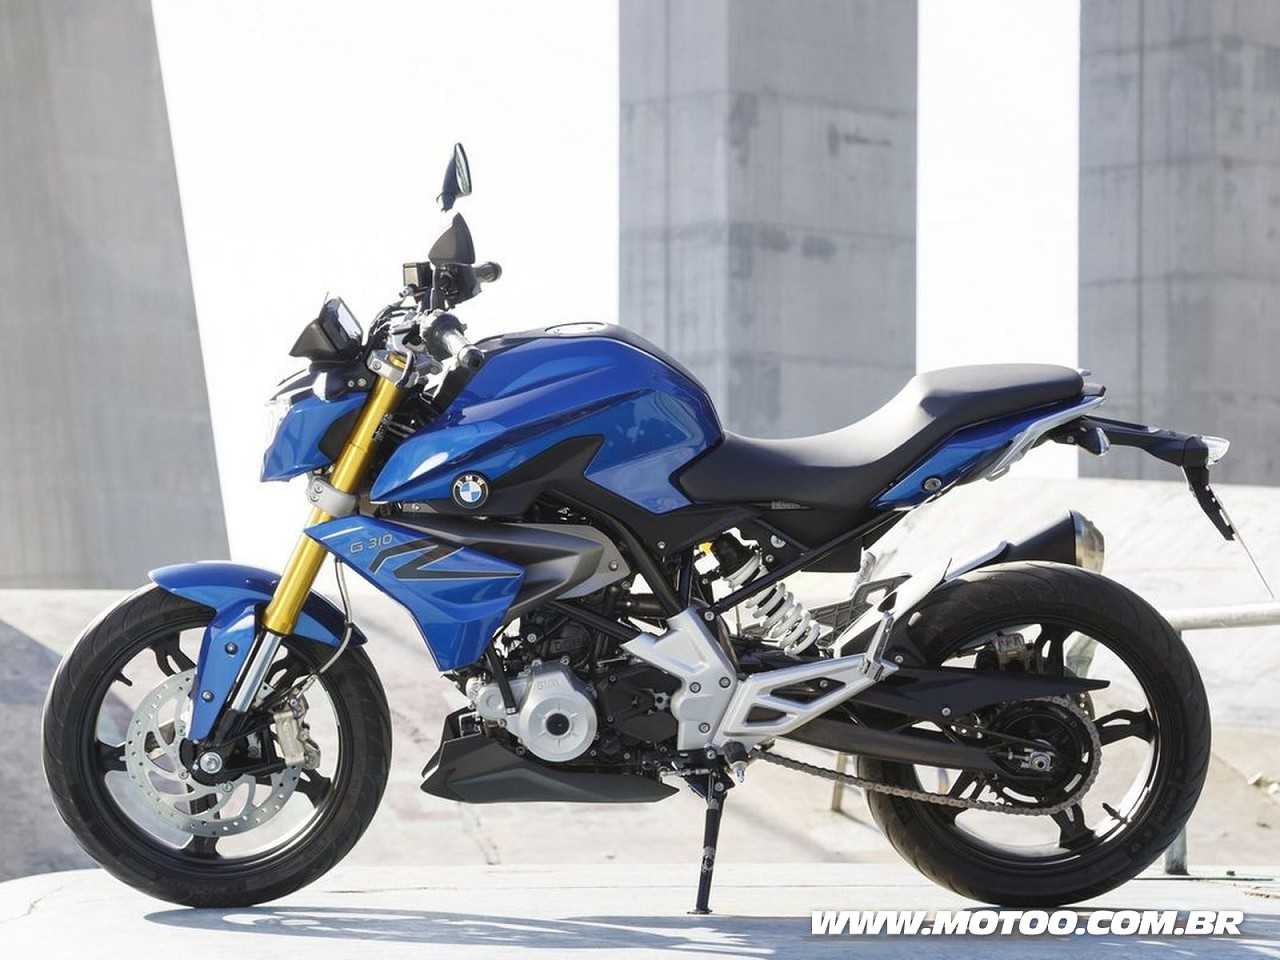 BMWG 310 R 2017 - lateral